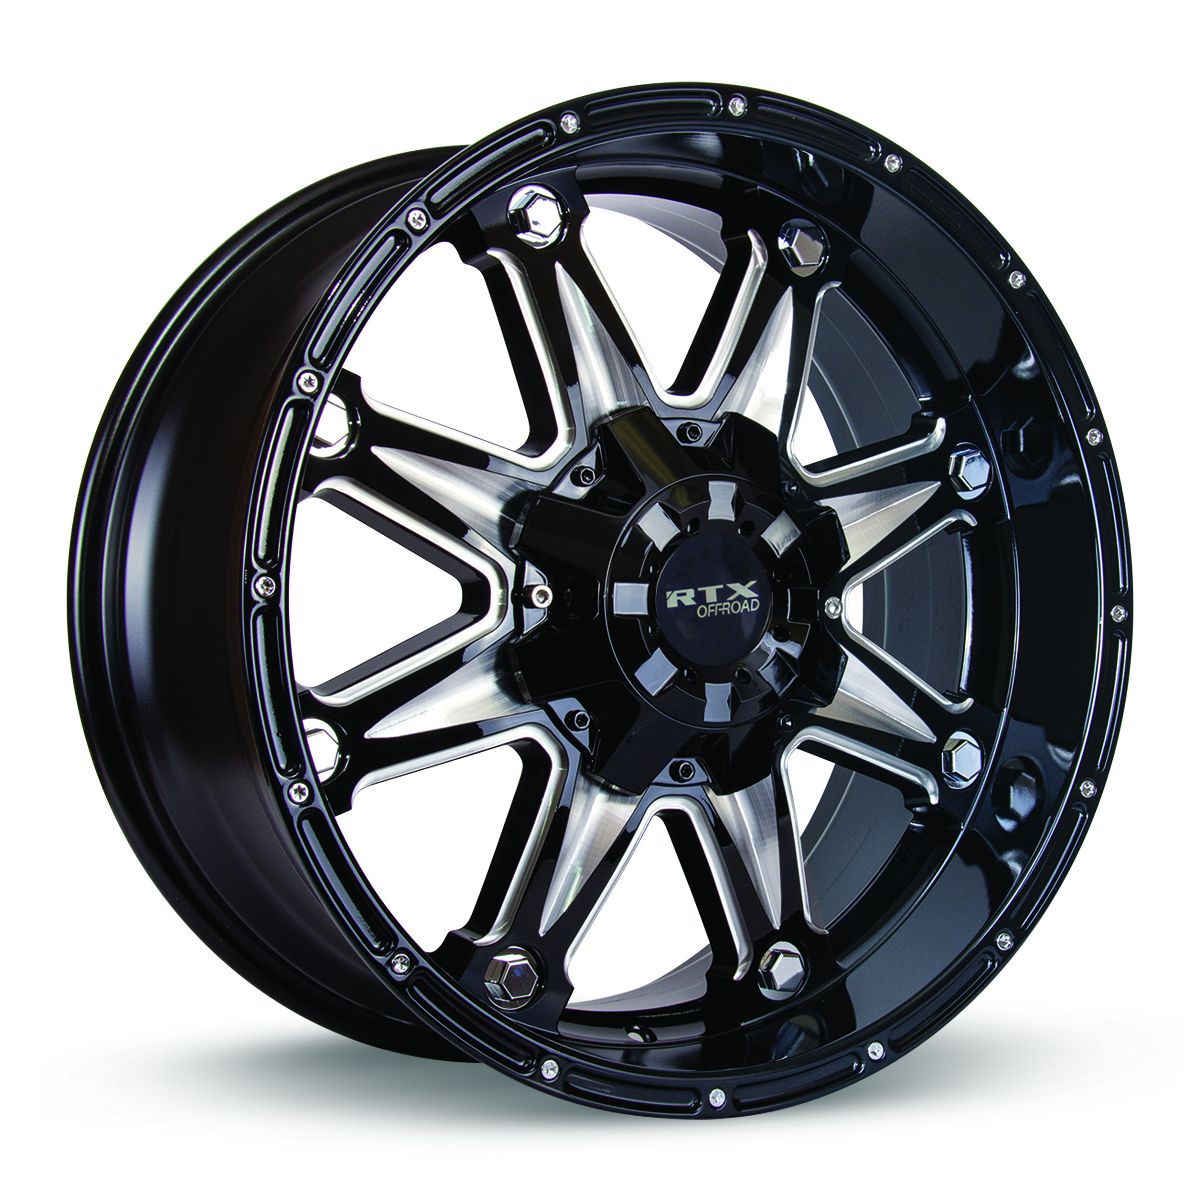 Spine • Black with Milled Spokes • 18x9 6x139.7 ET10 CB106.1